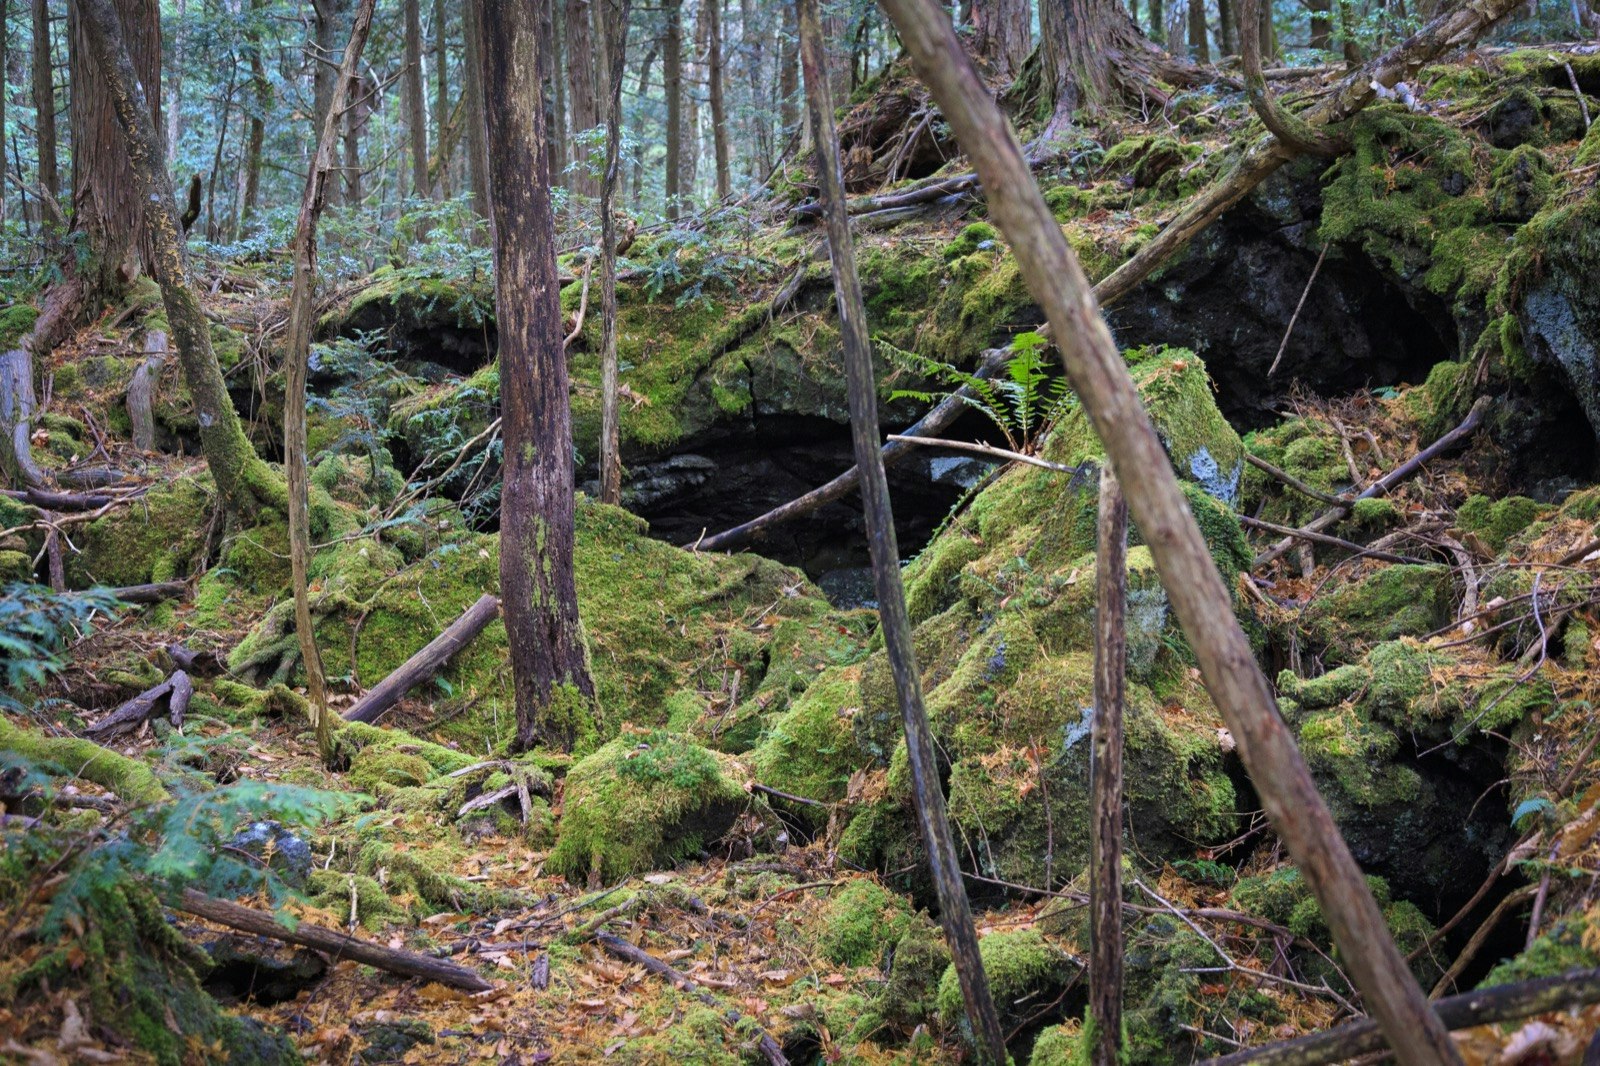 Green moss covers rocks among trees trunks in a thick forest; haunted places world